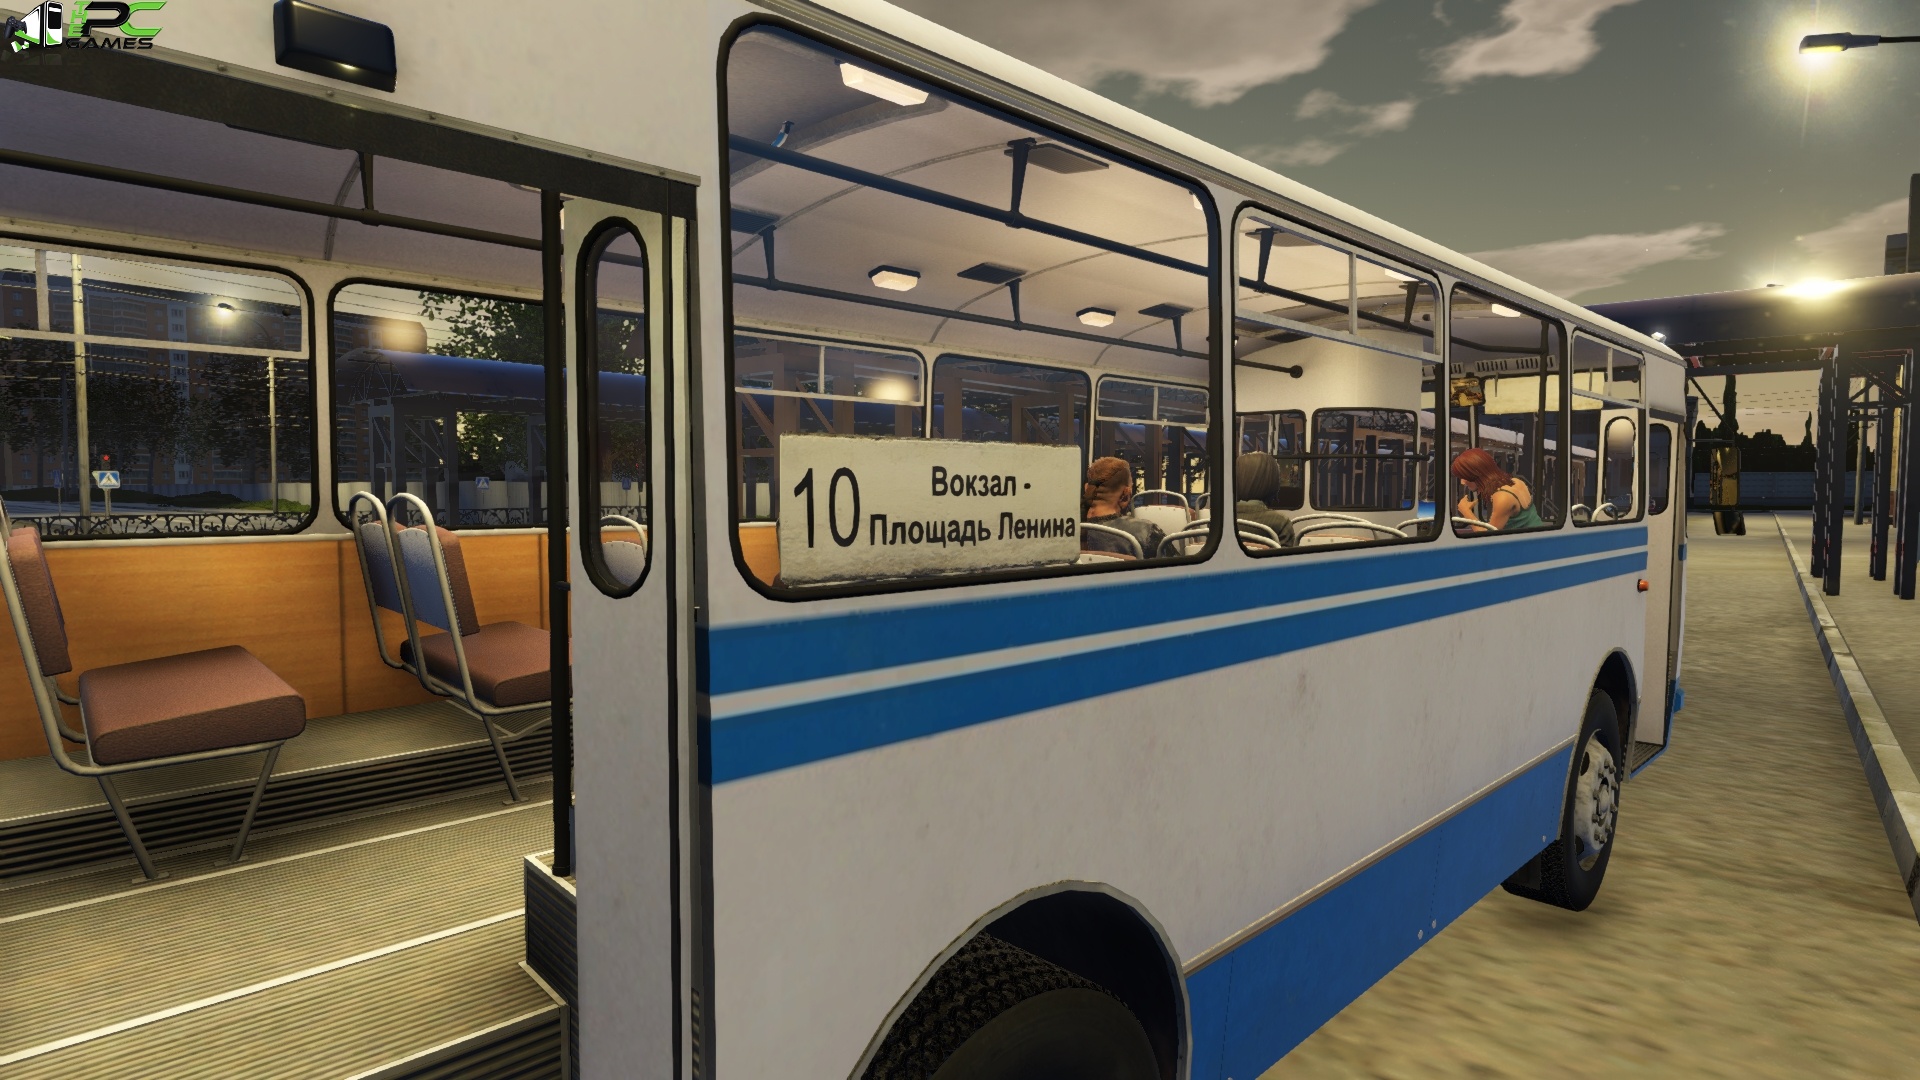 city bus simulator games for pc free download